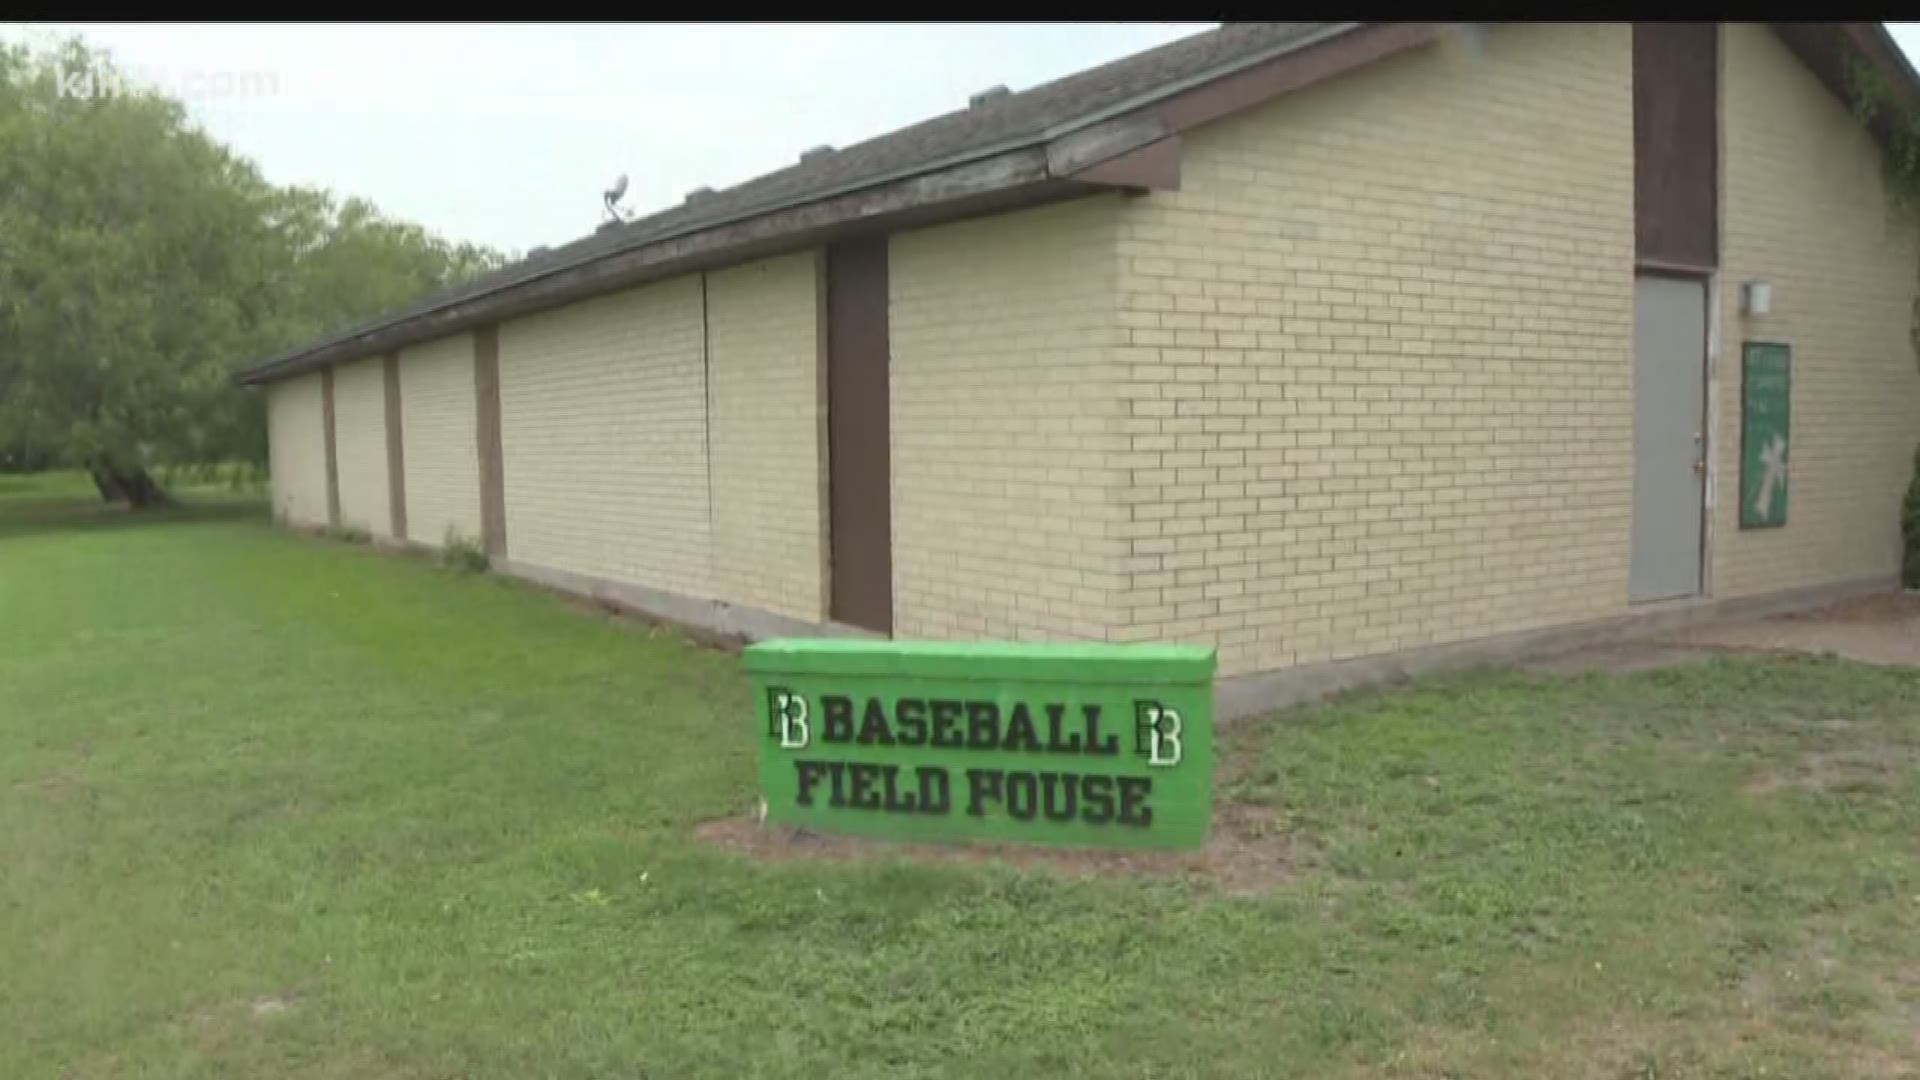 As temperatures soar outside, no one wants to be without air conditioning inside; but that is exactly what one baseball team in Banquete is dealing with.